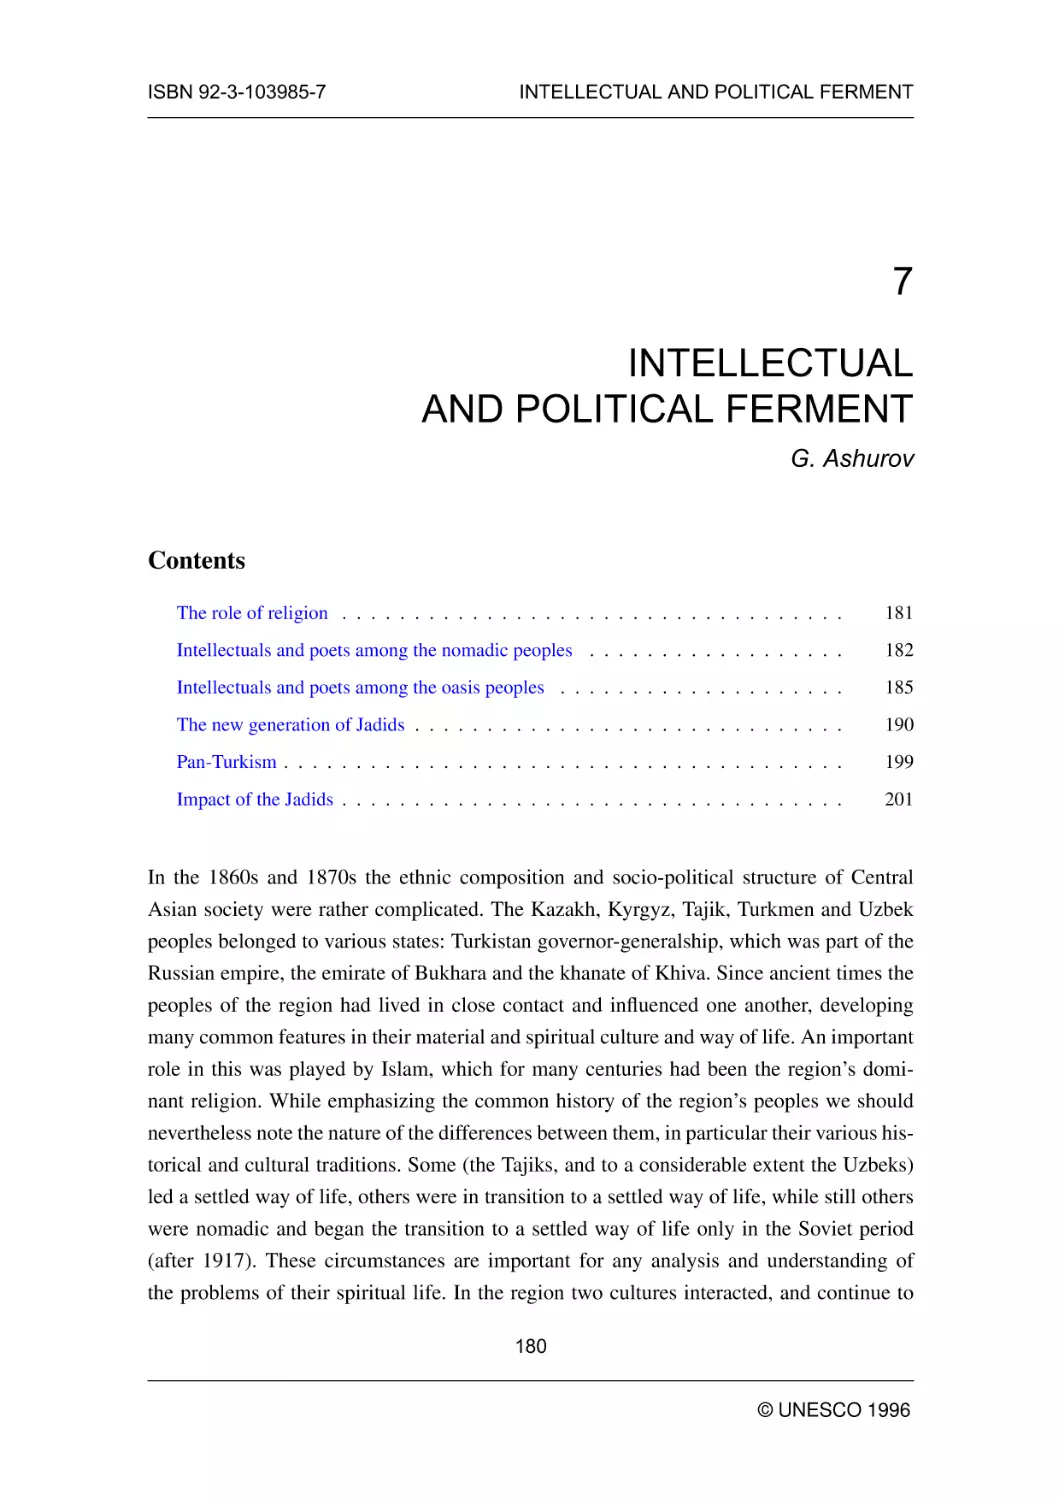 INTELLECTUAL AND POLITICAL FERMENT